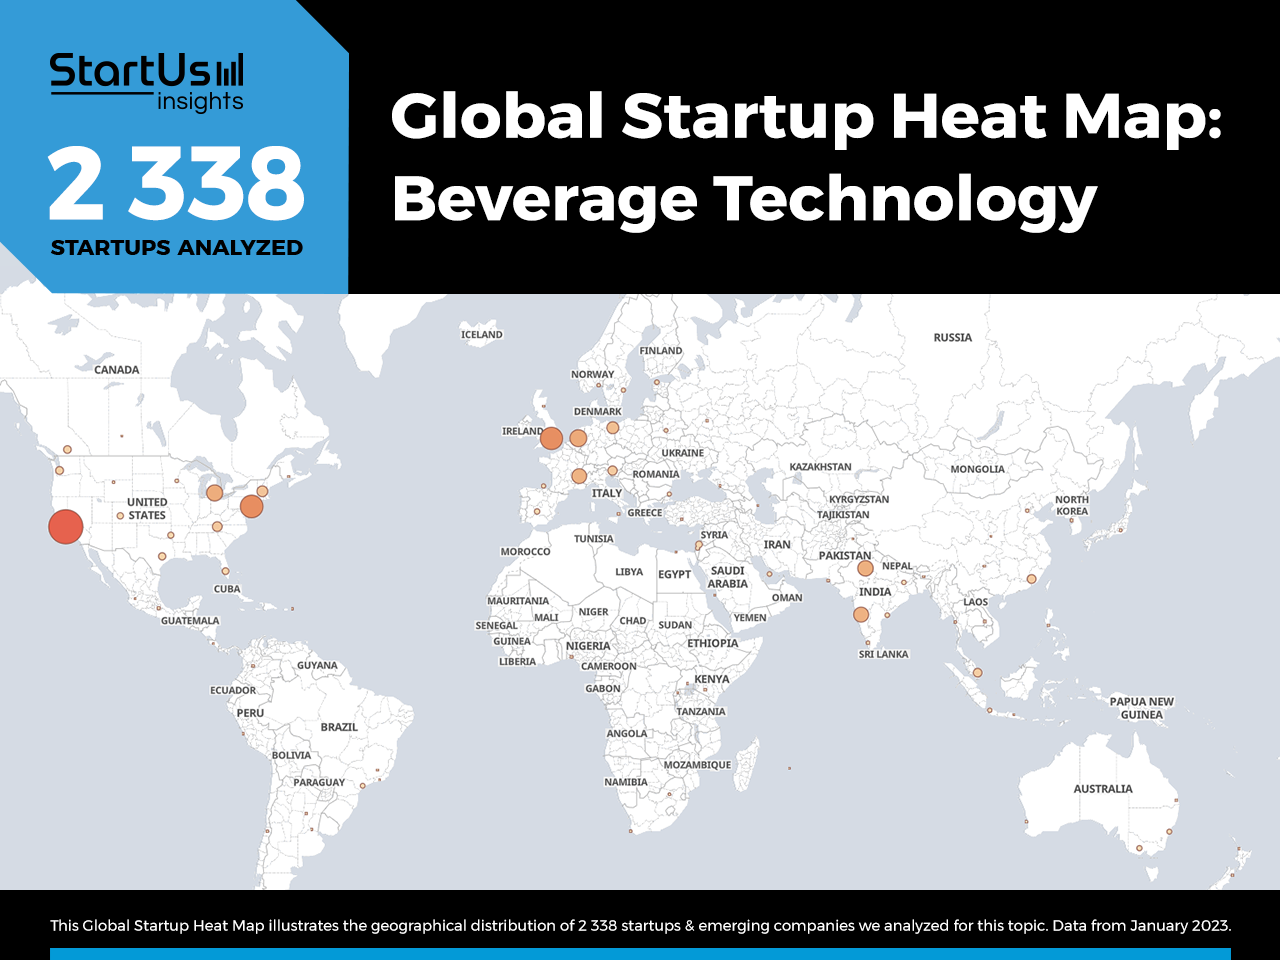 BevTech-Trends-Heat-Map-StartUs-Insights-noresize